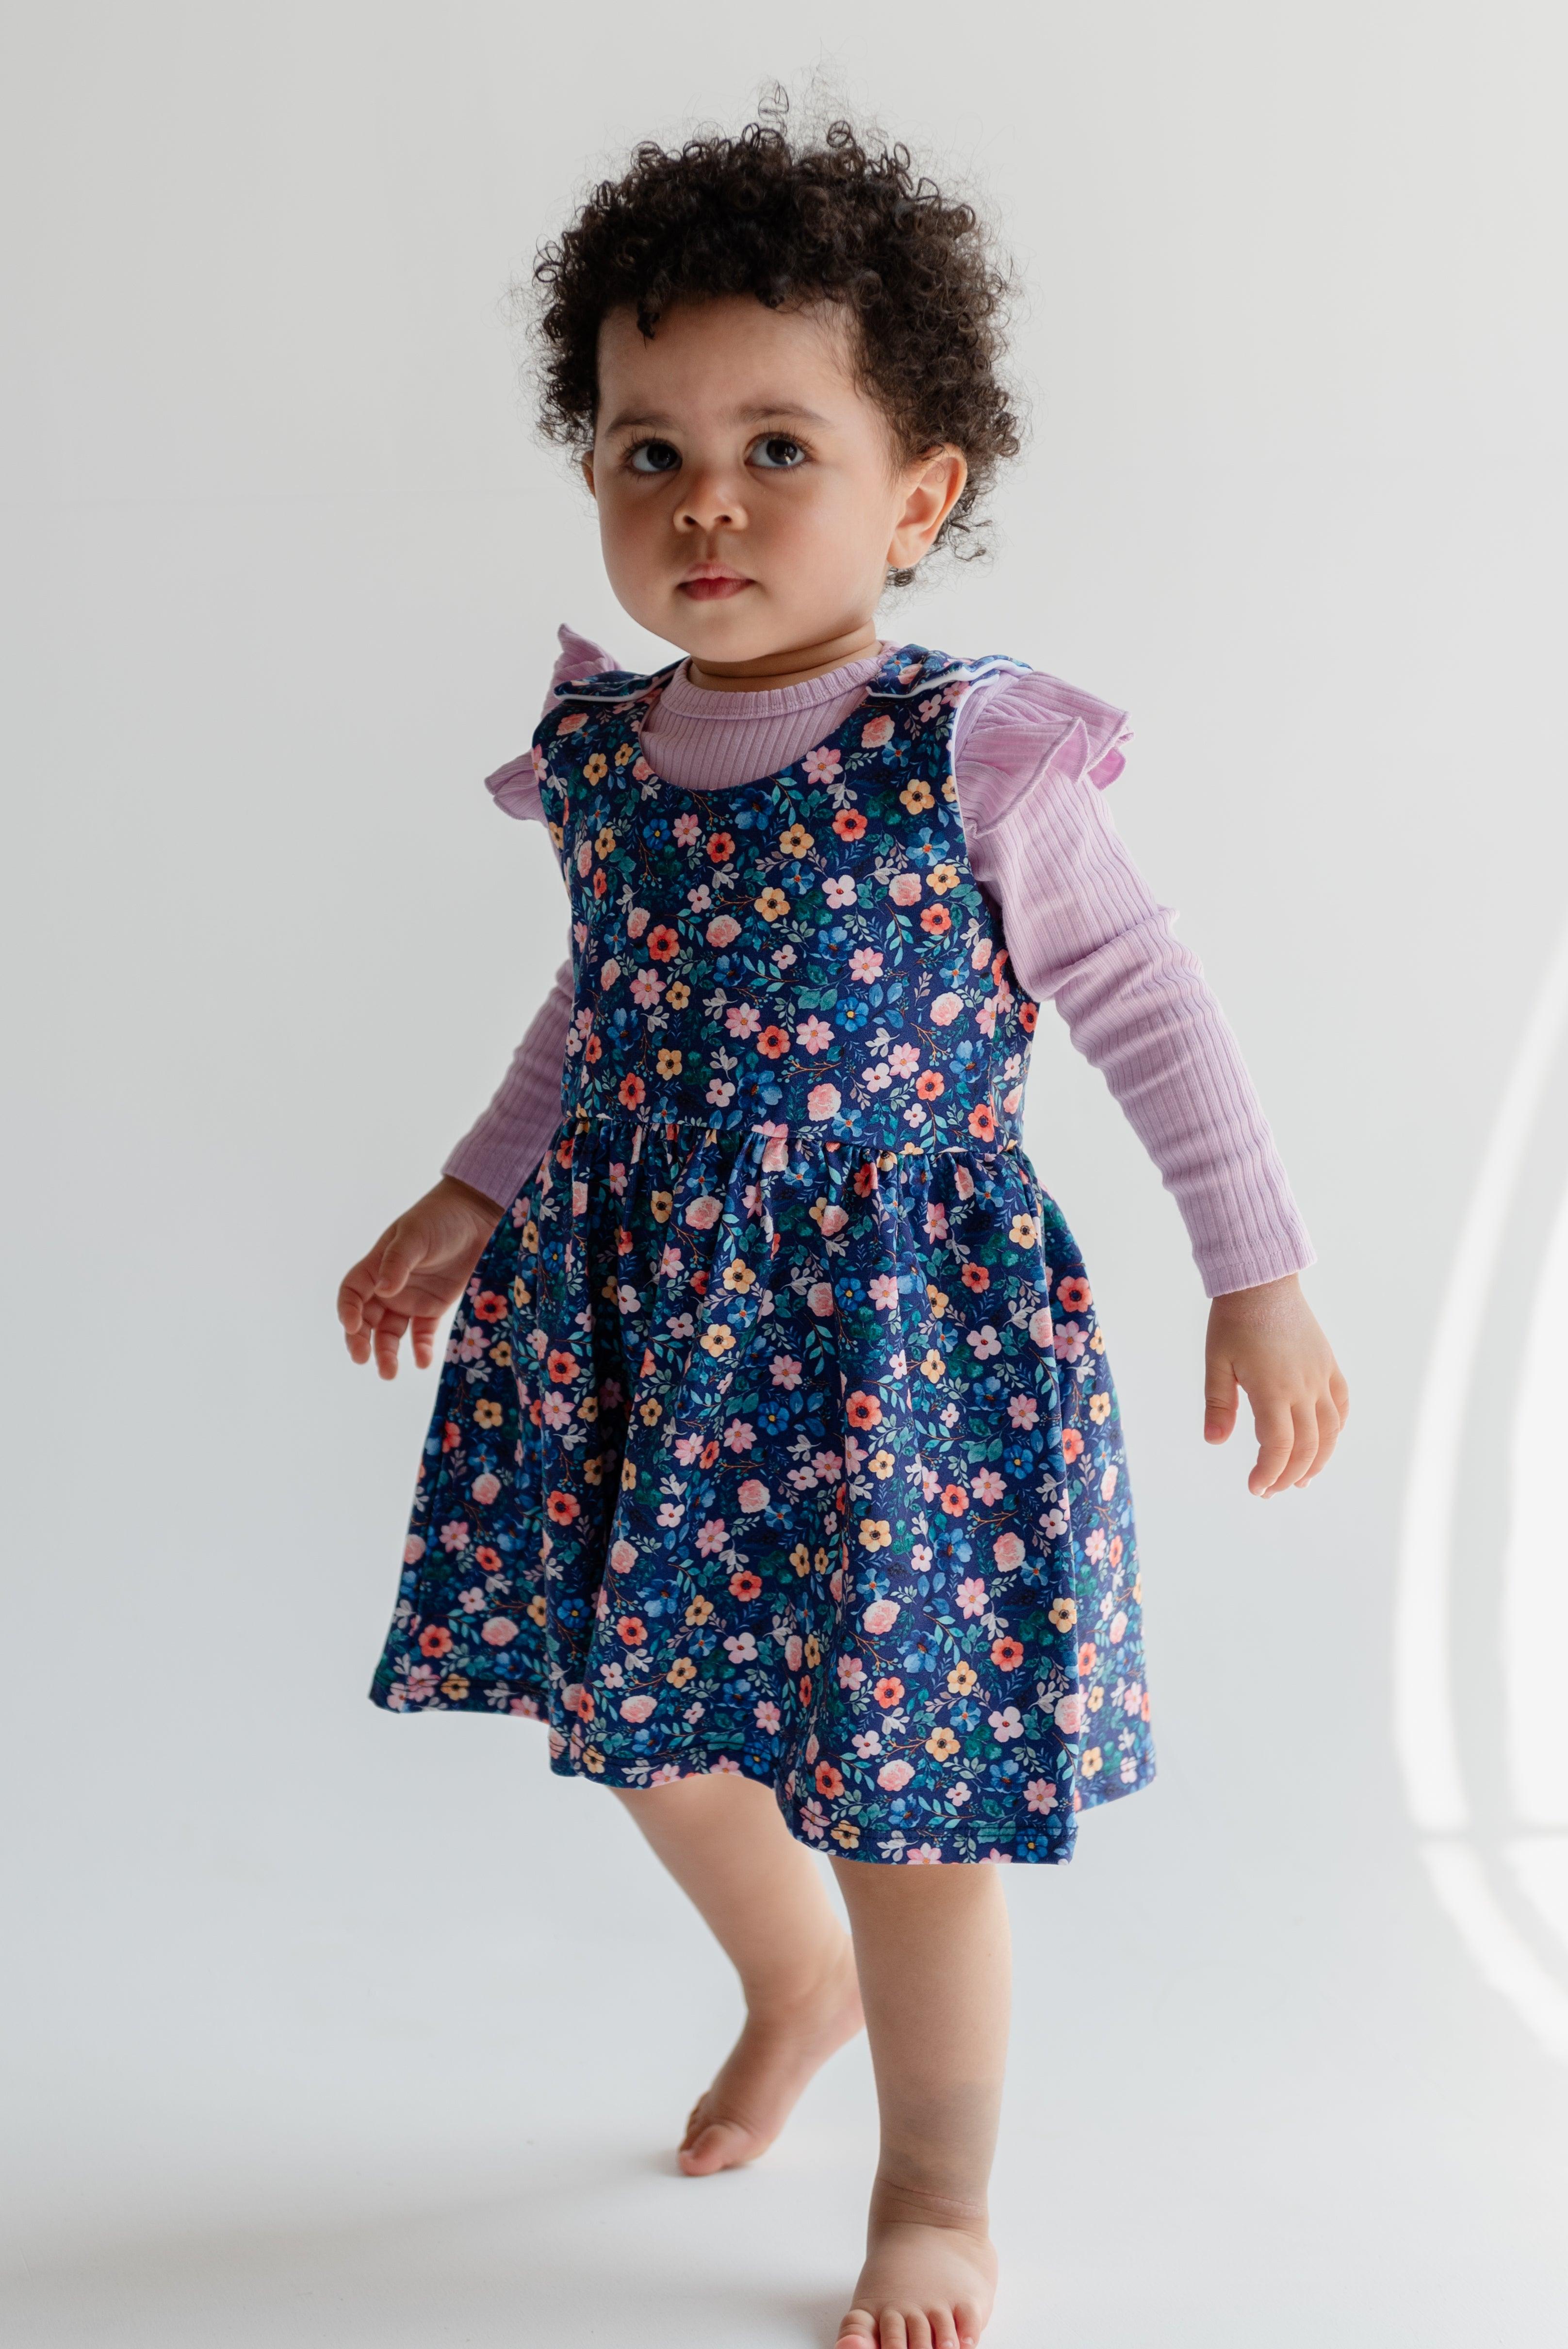 files/navy-dainty-floral-dress-claybearofficial-1.jpg